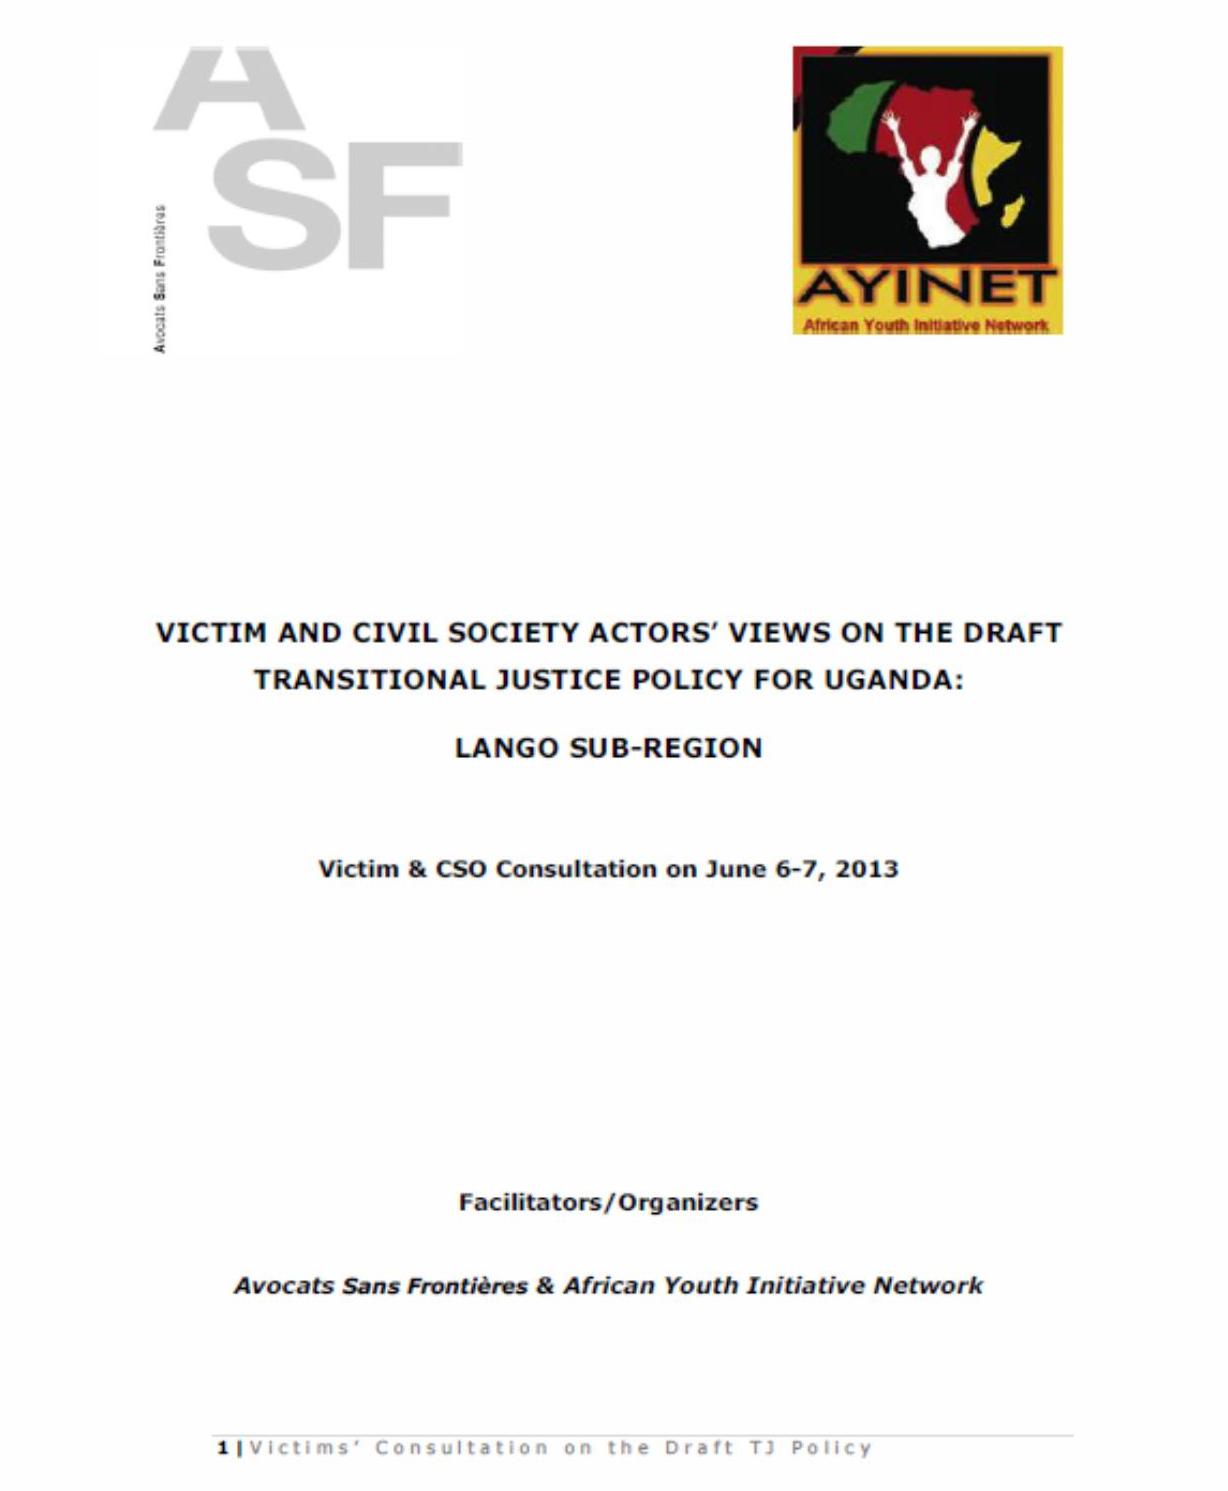 Victim and civil society actors’ view on the draft transitional justice policy for Uganda: Lango sub-region